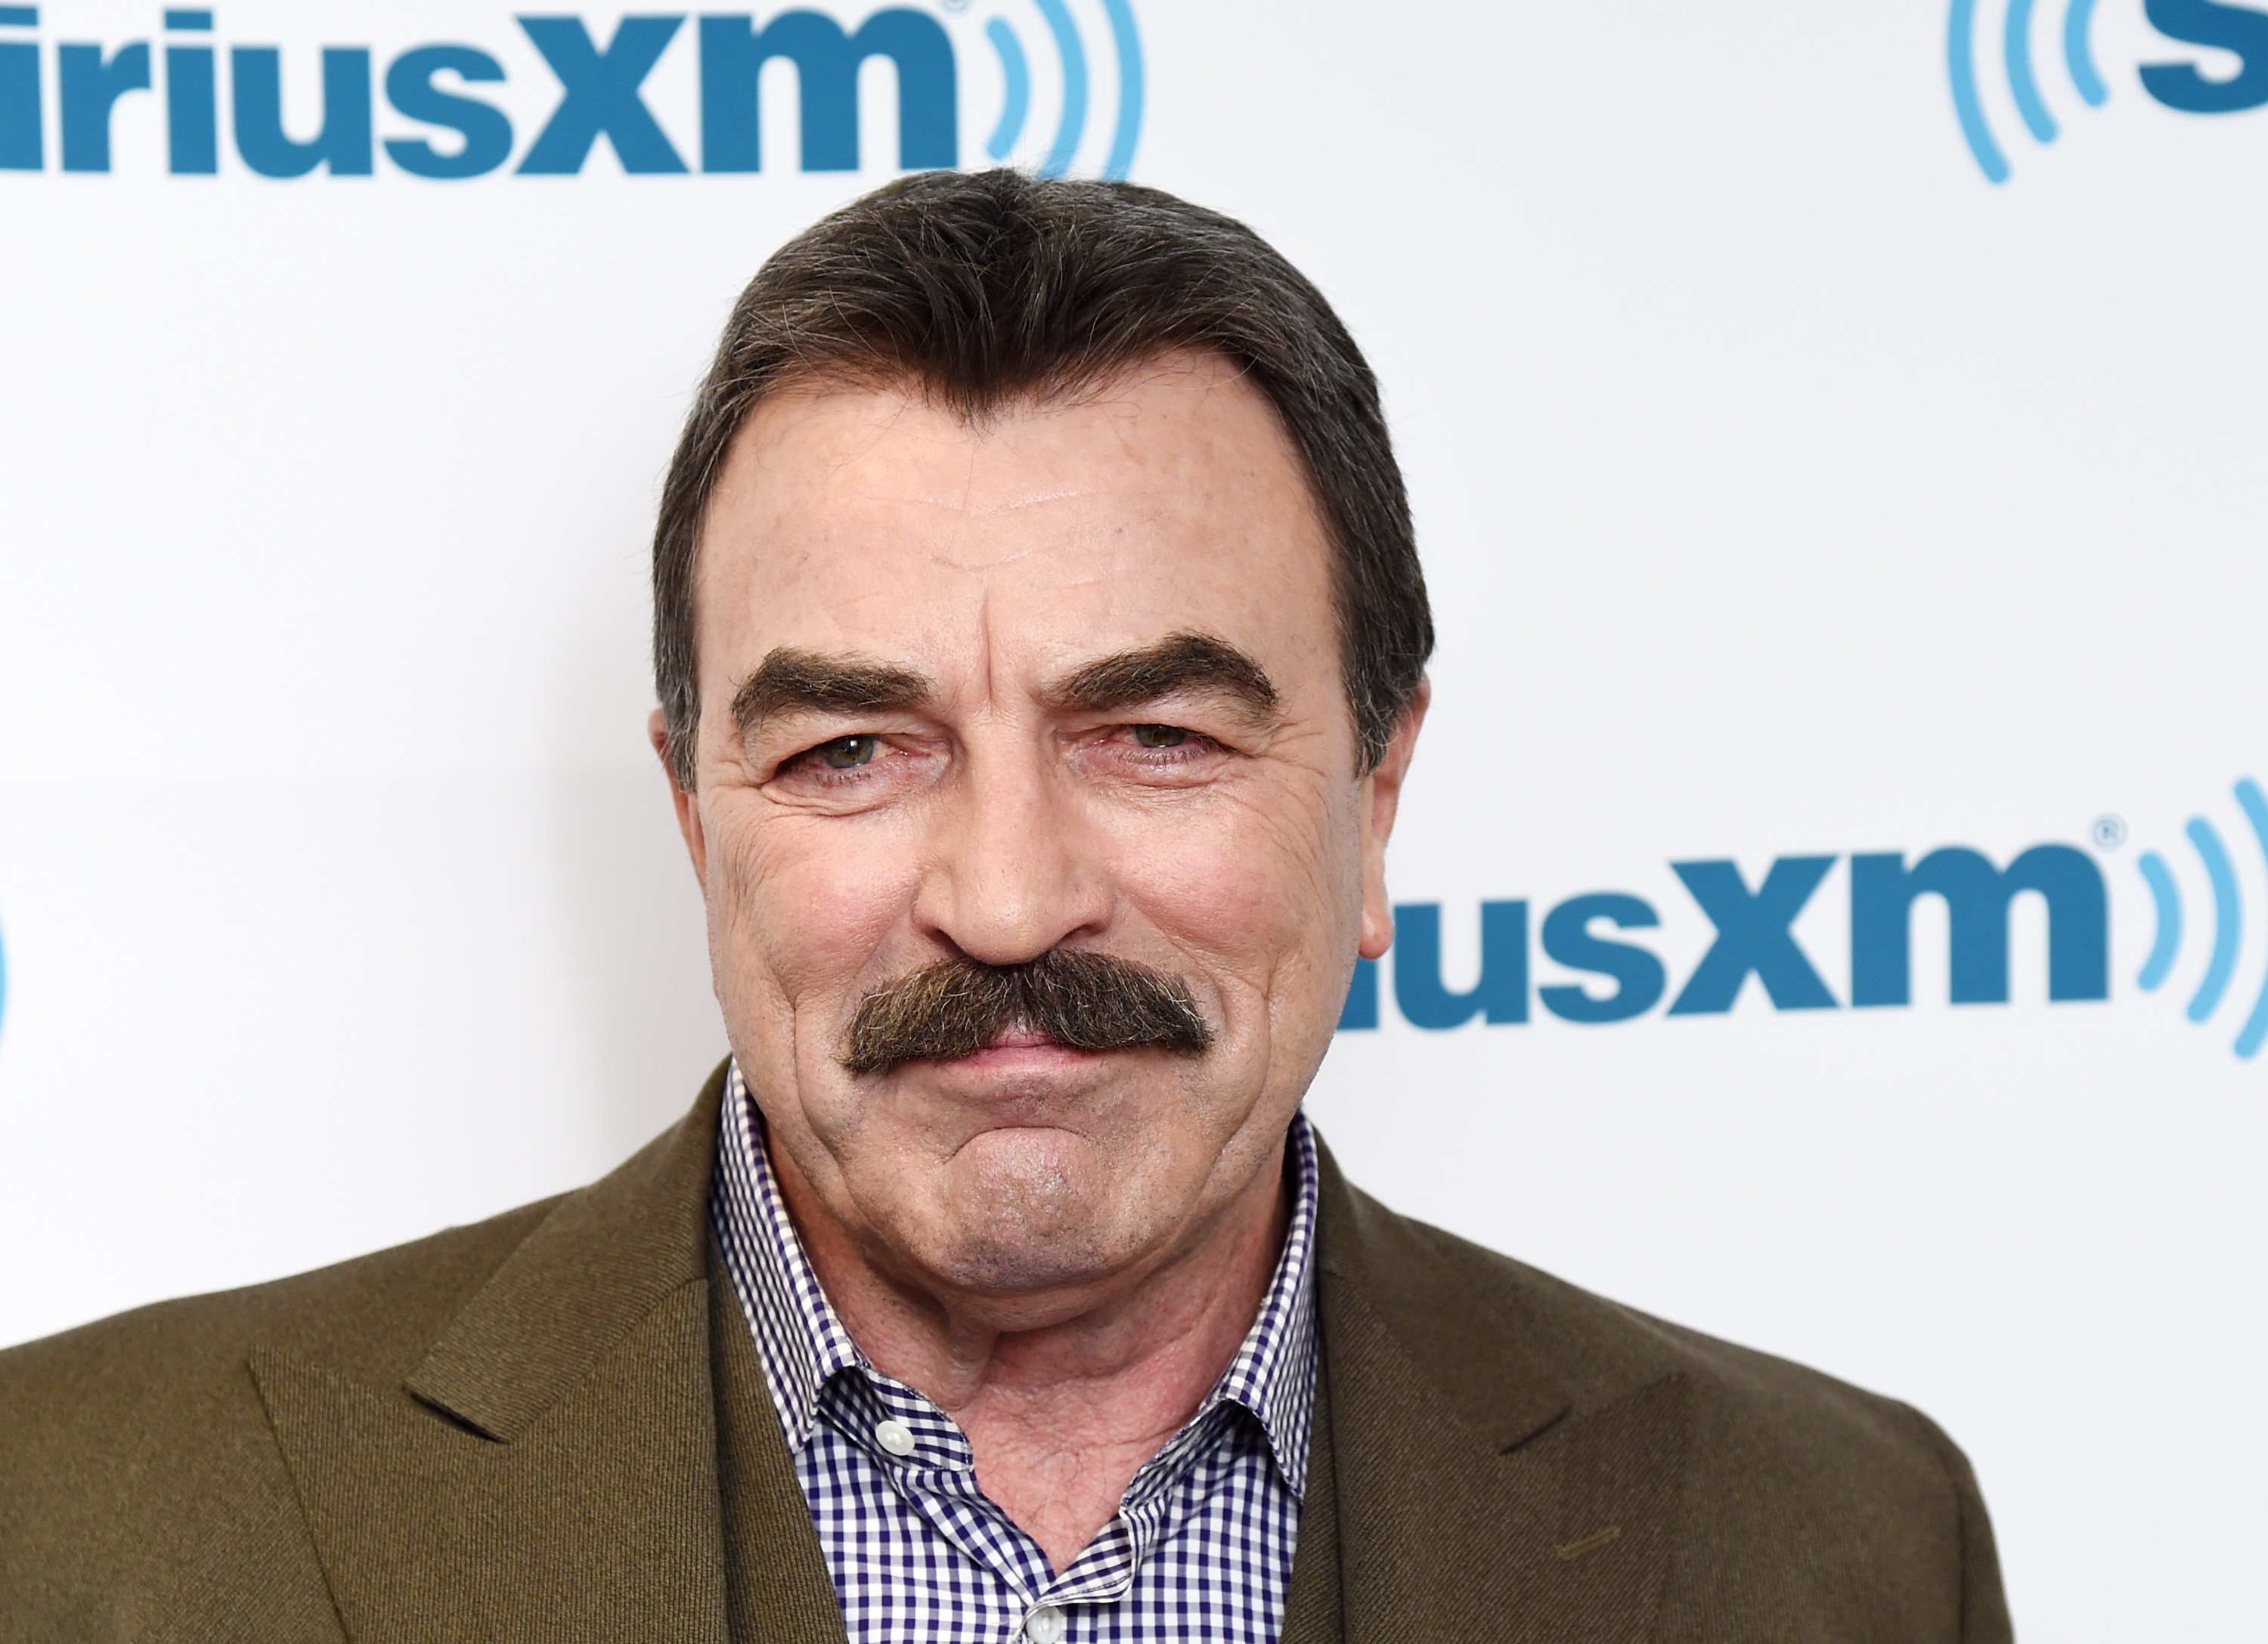 Tom Selleck visits the SiriusXM Studios on October 15, 2015 in New York City. | Photo: Getty Images